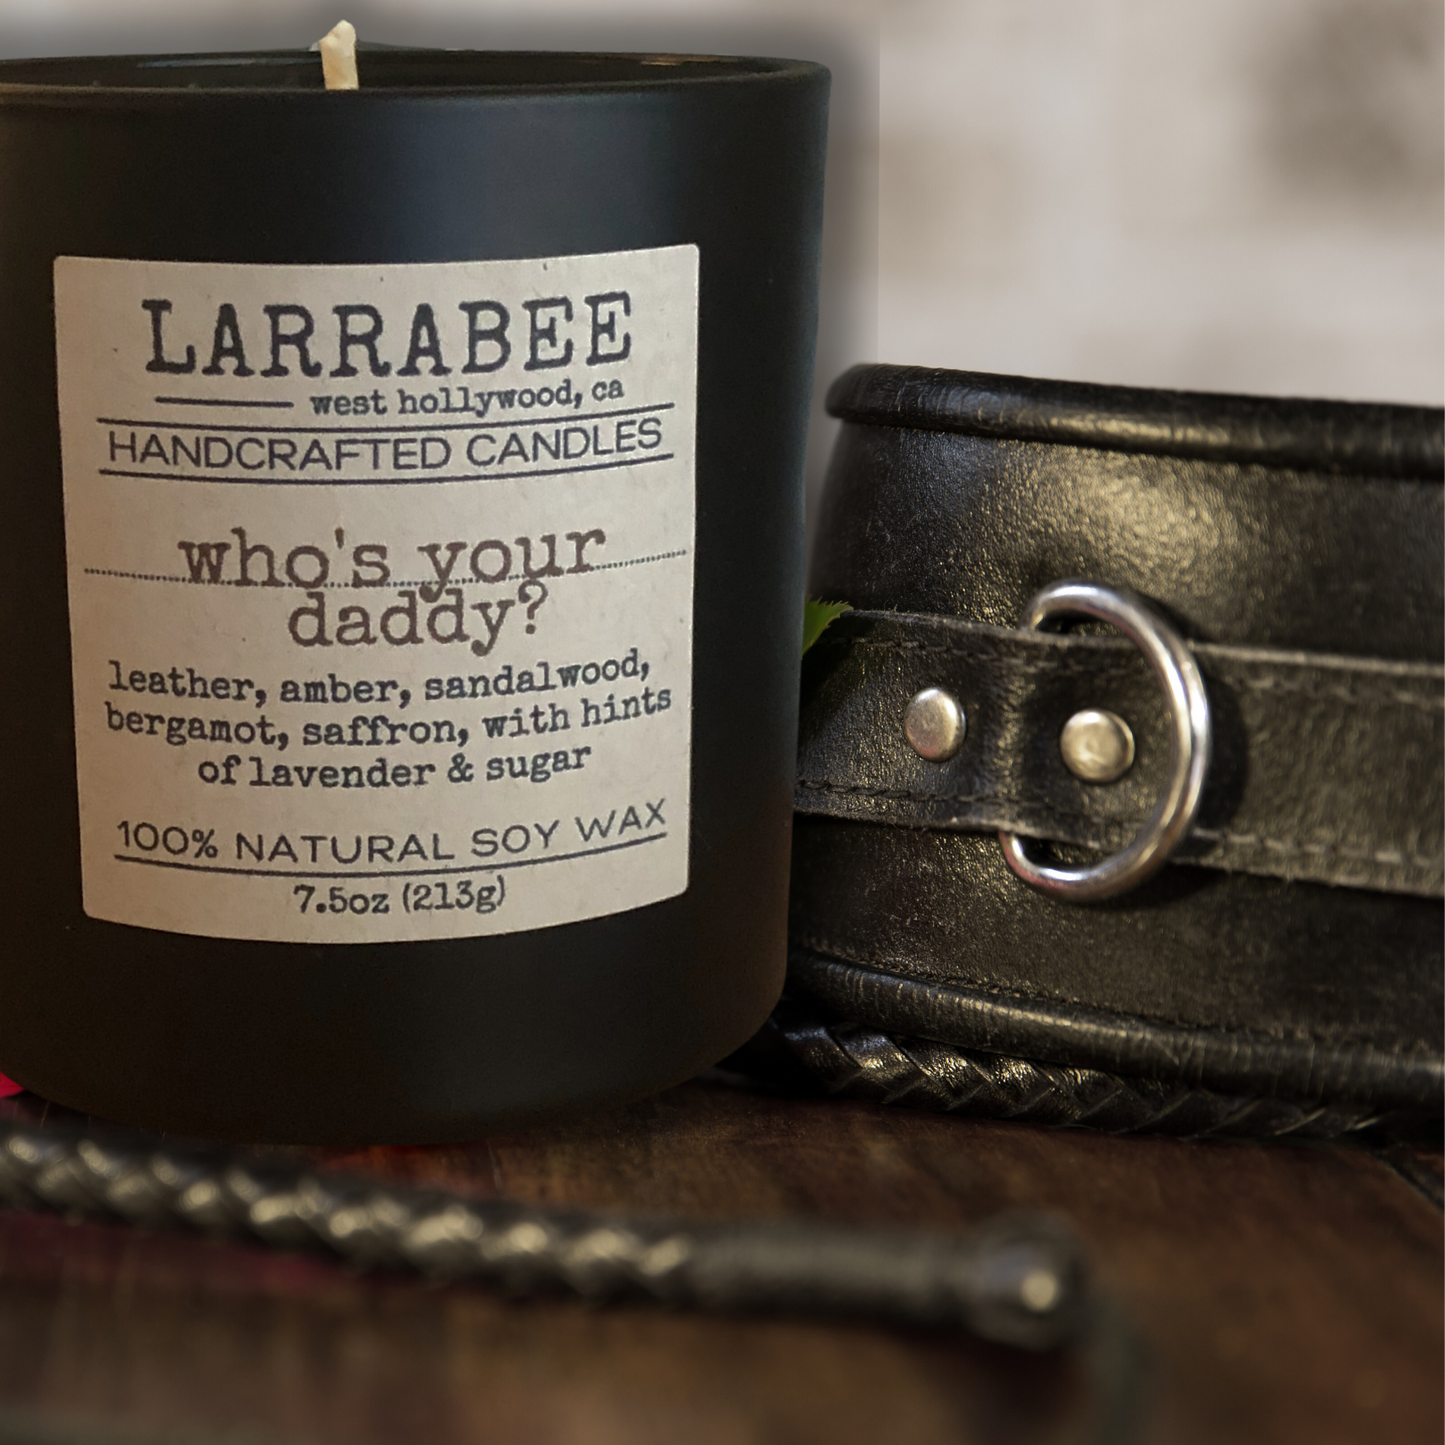 Who's Your Daddy? handcrafted candle